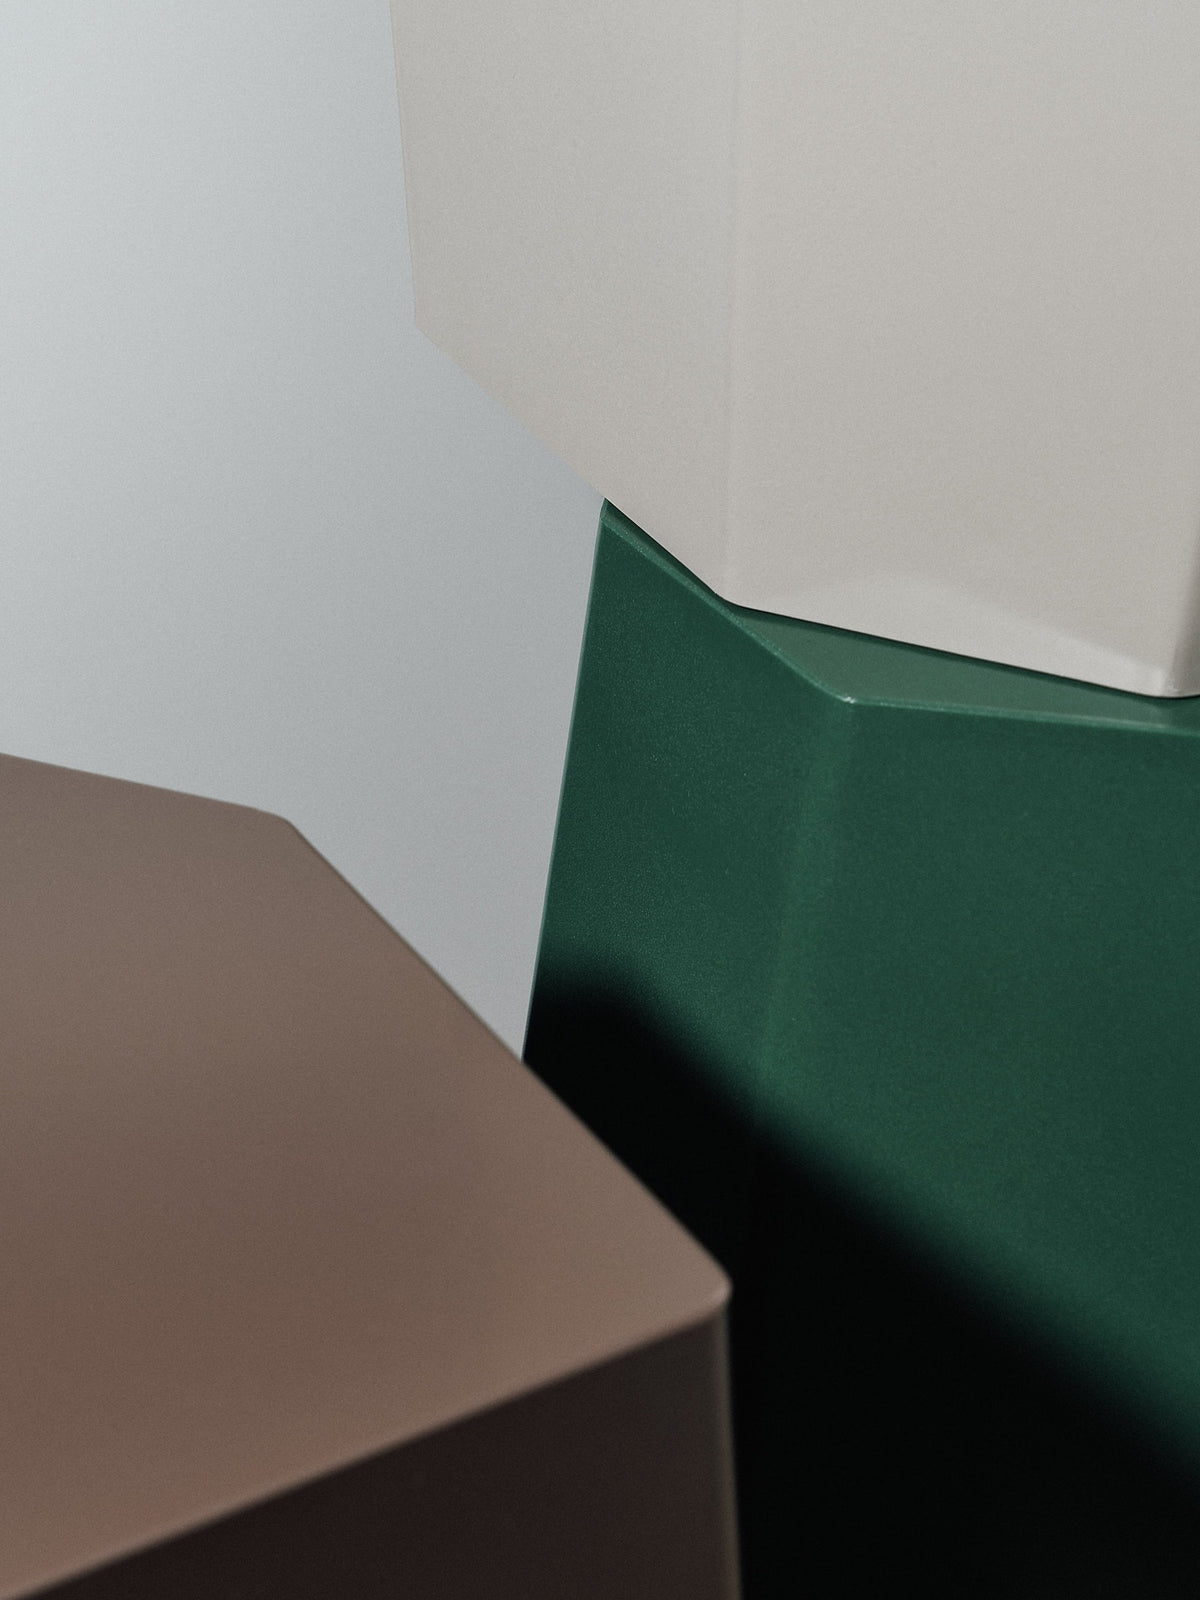 A Martino Gamper Arnoldino Stool - Forest set of side tables, featuring green, brown, and beige colors.